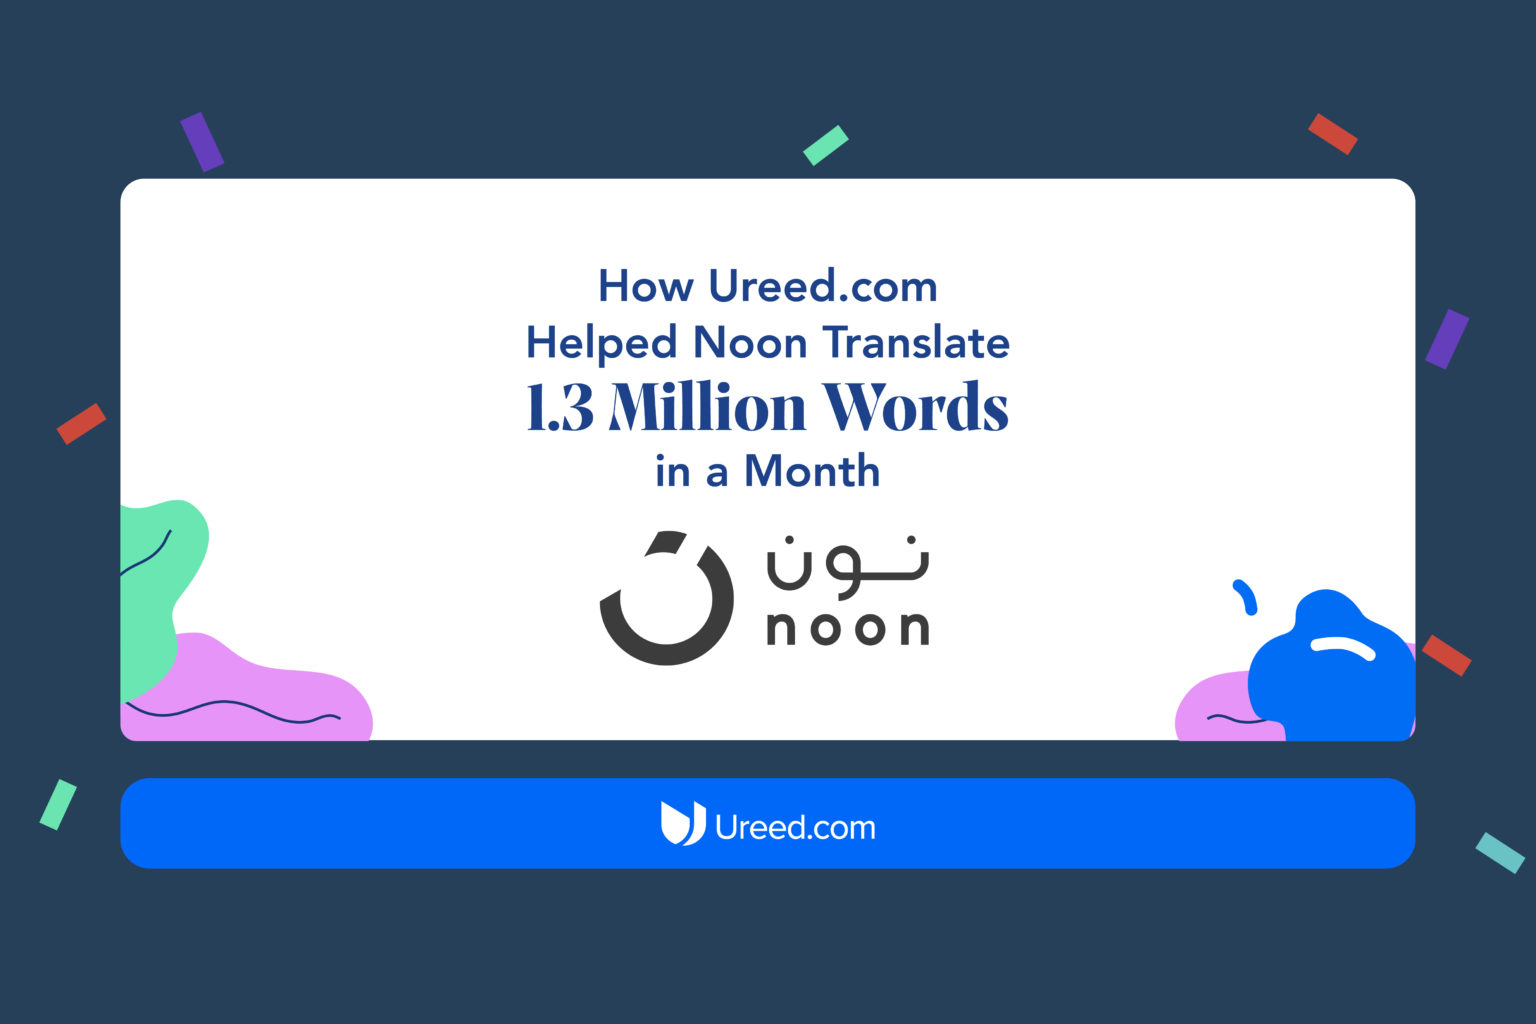 How Ureed.com Helped Noon Translate 1.3M Words in a Month